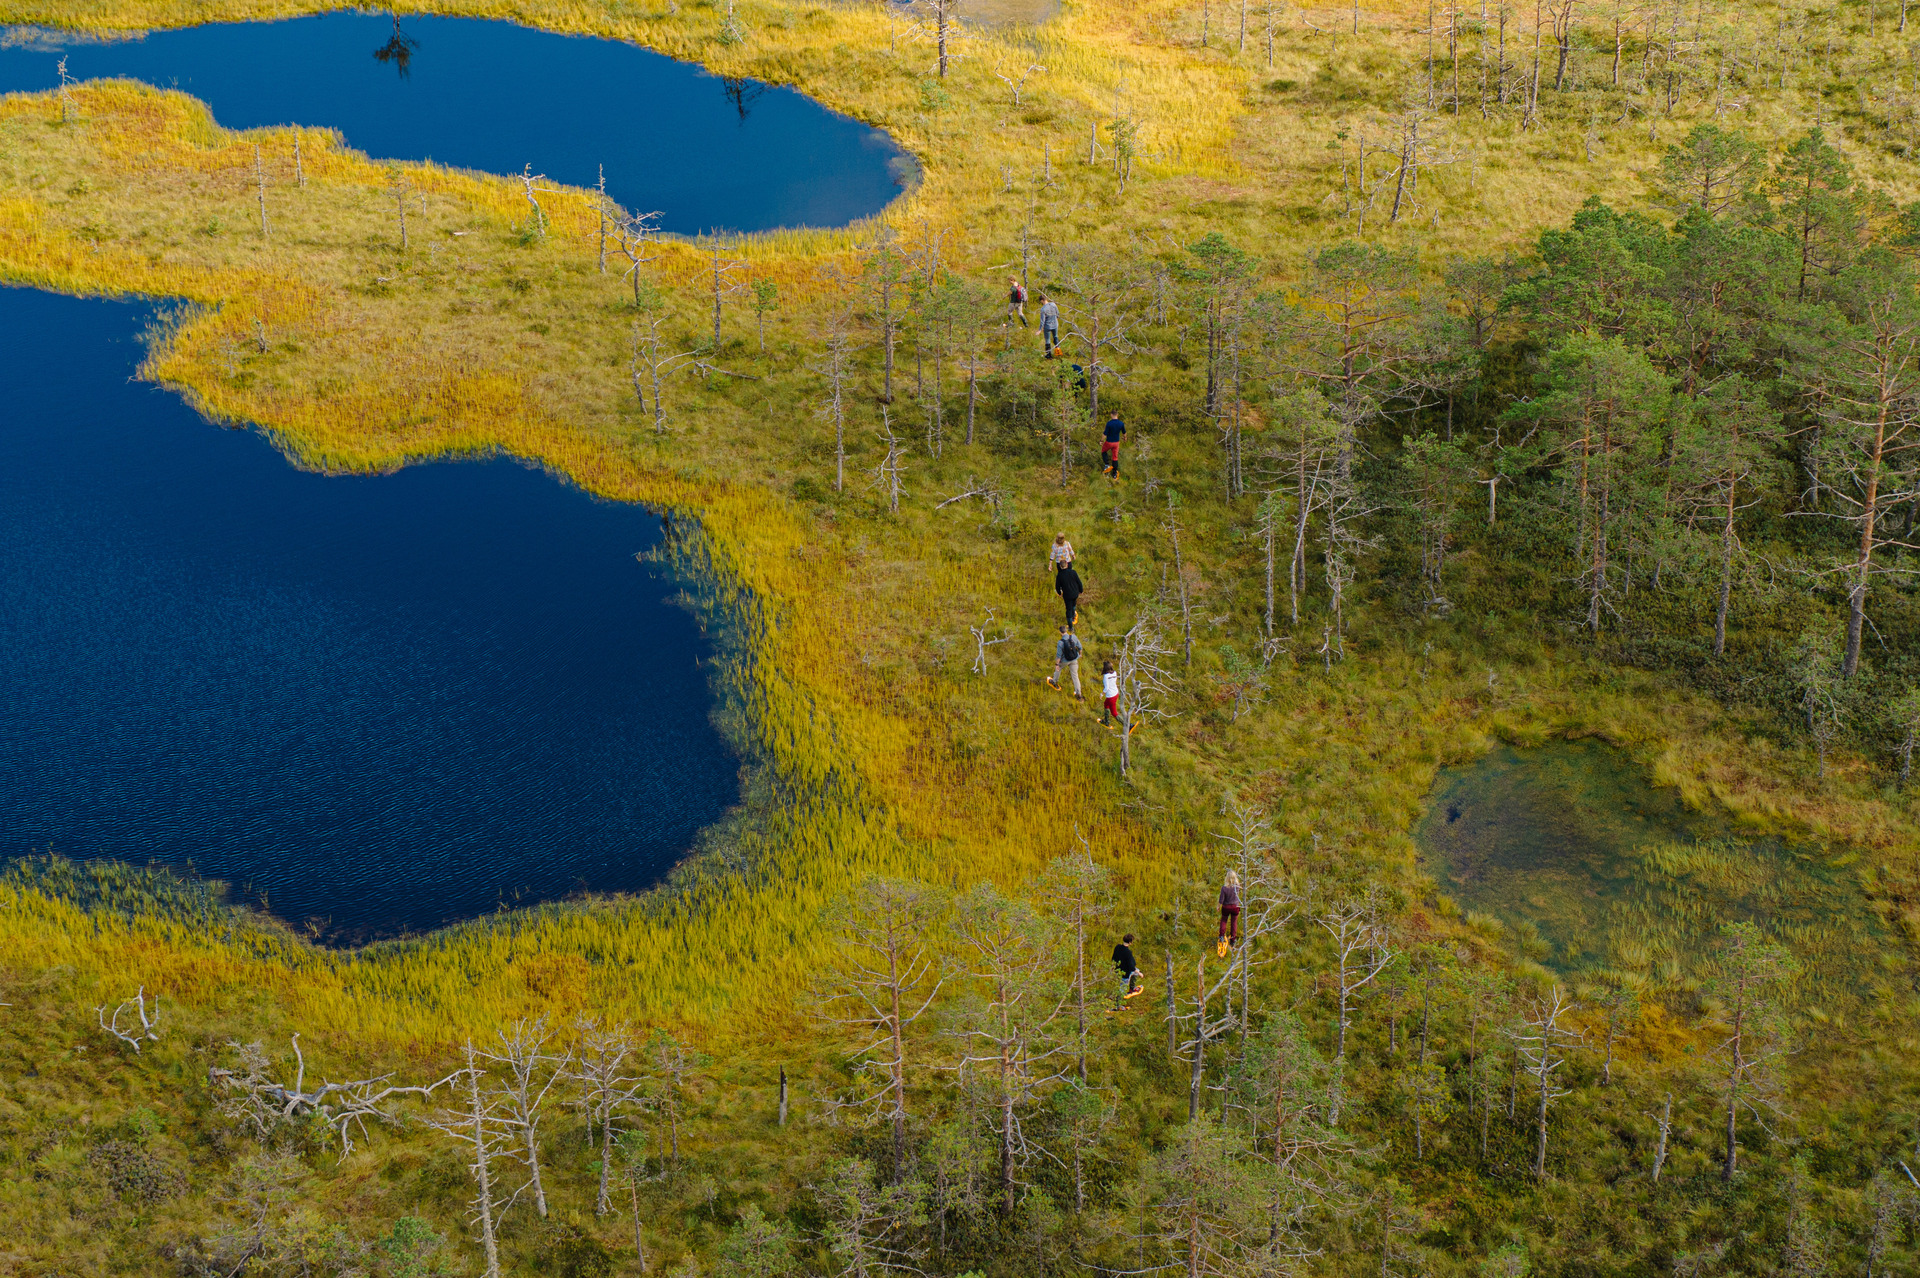 Viru Bog, one of the most accessible bogs in Estonia, passes through the forest and bog landscapes characteristic of Lahemaa National Park. The trail 